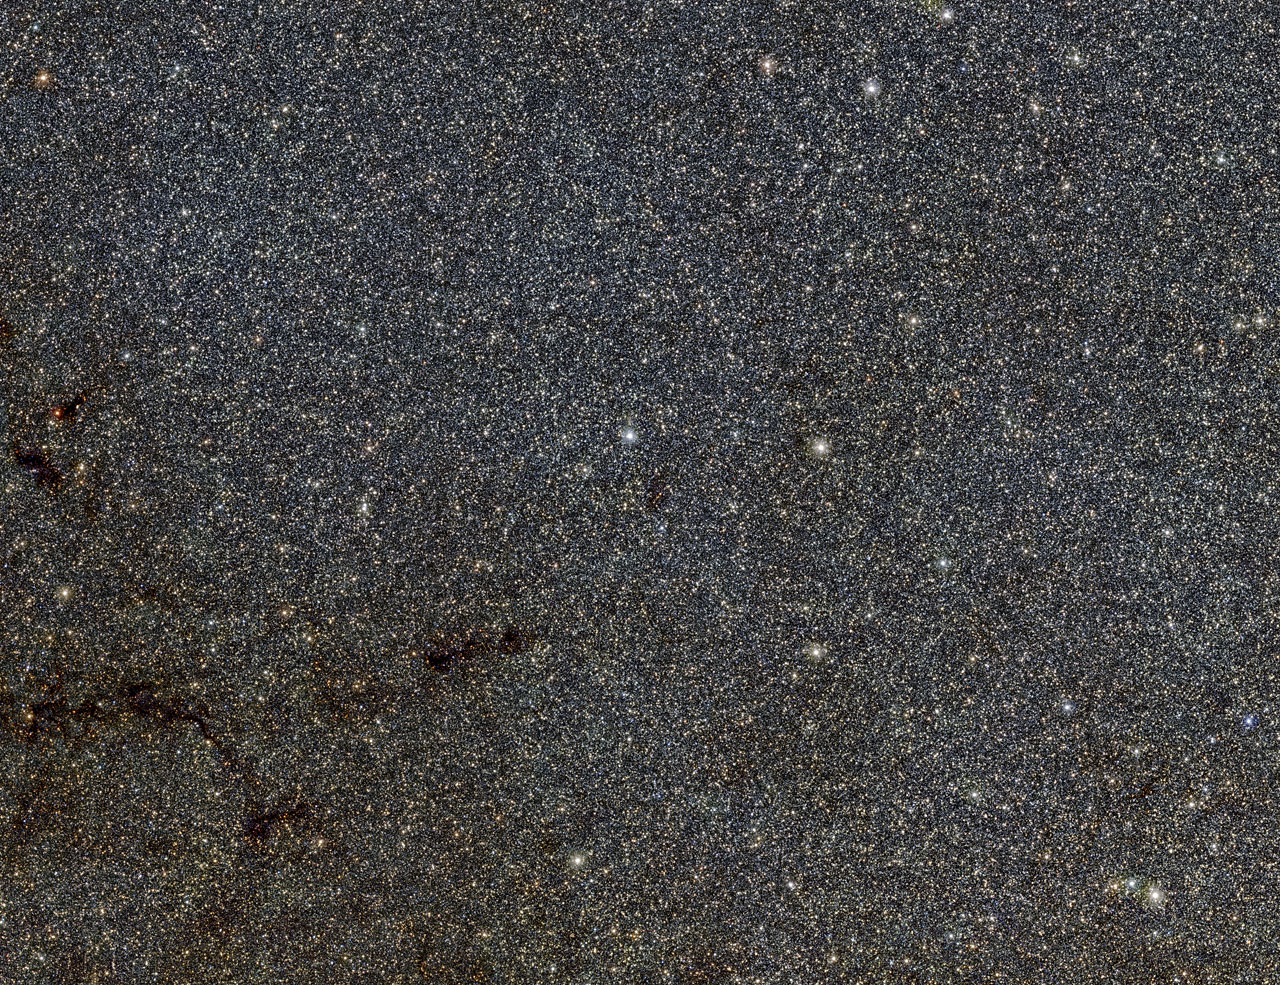 Part of the VVV view of the bulge of the Milky Way from ESO